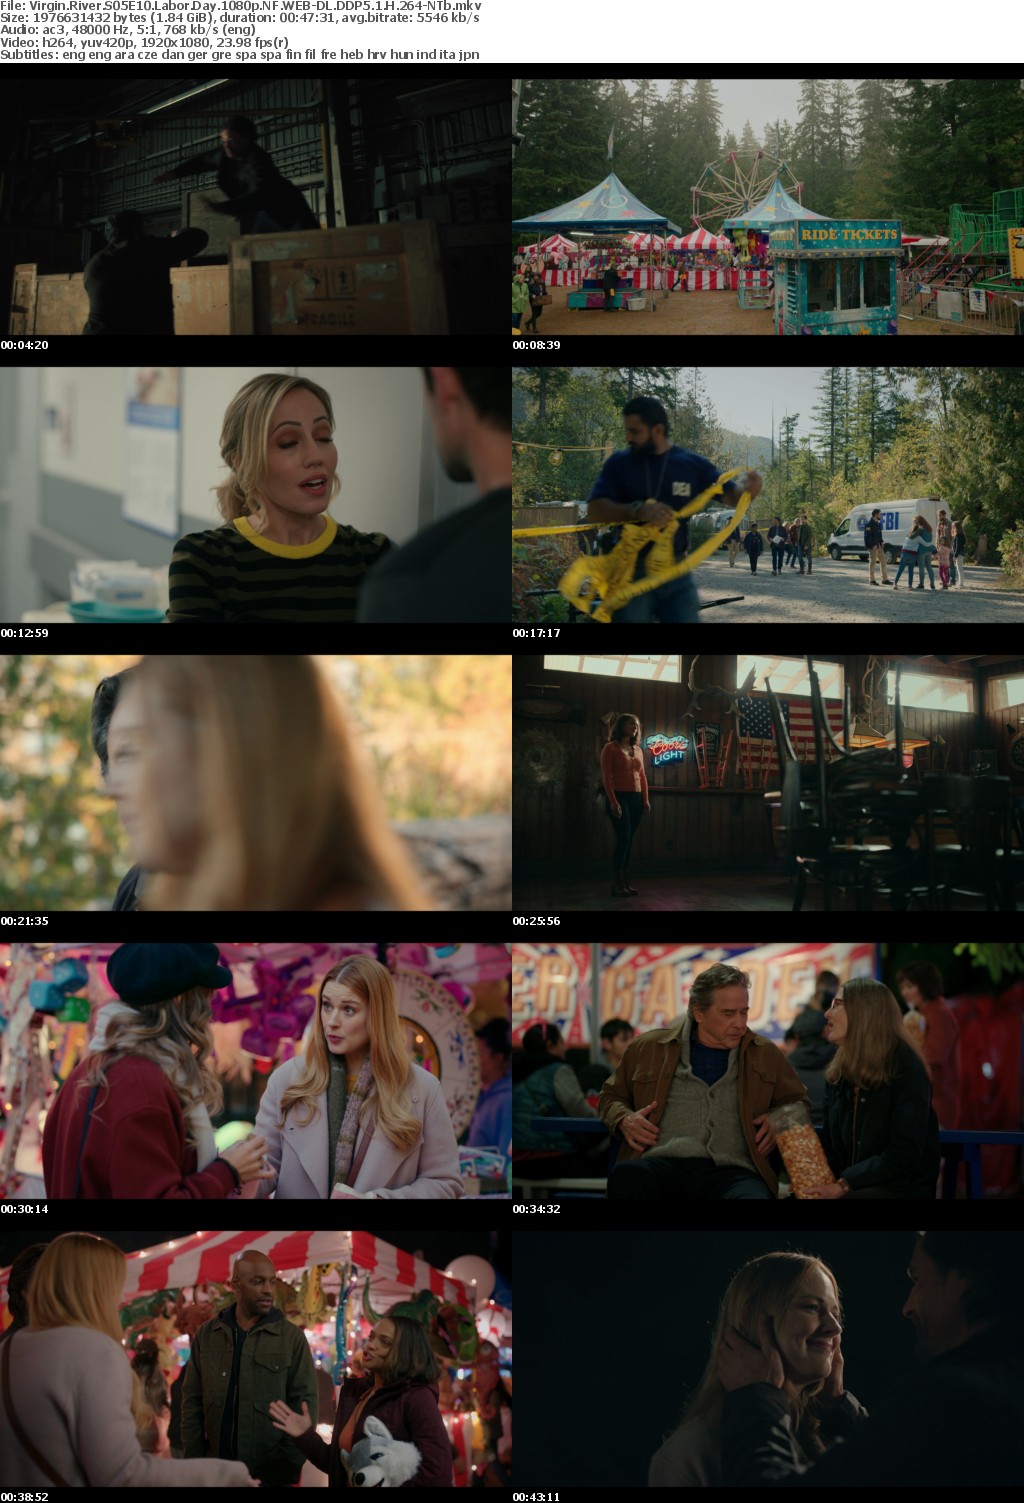 Virgin River S05E10 Labor Day 1080p NF WEB-DL DDP5 1 H 264-NTb